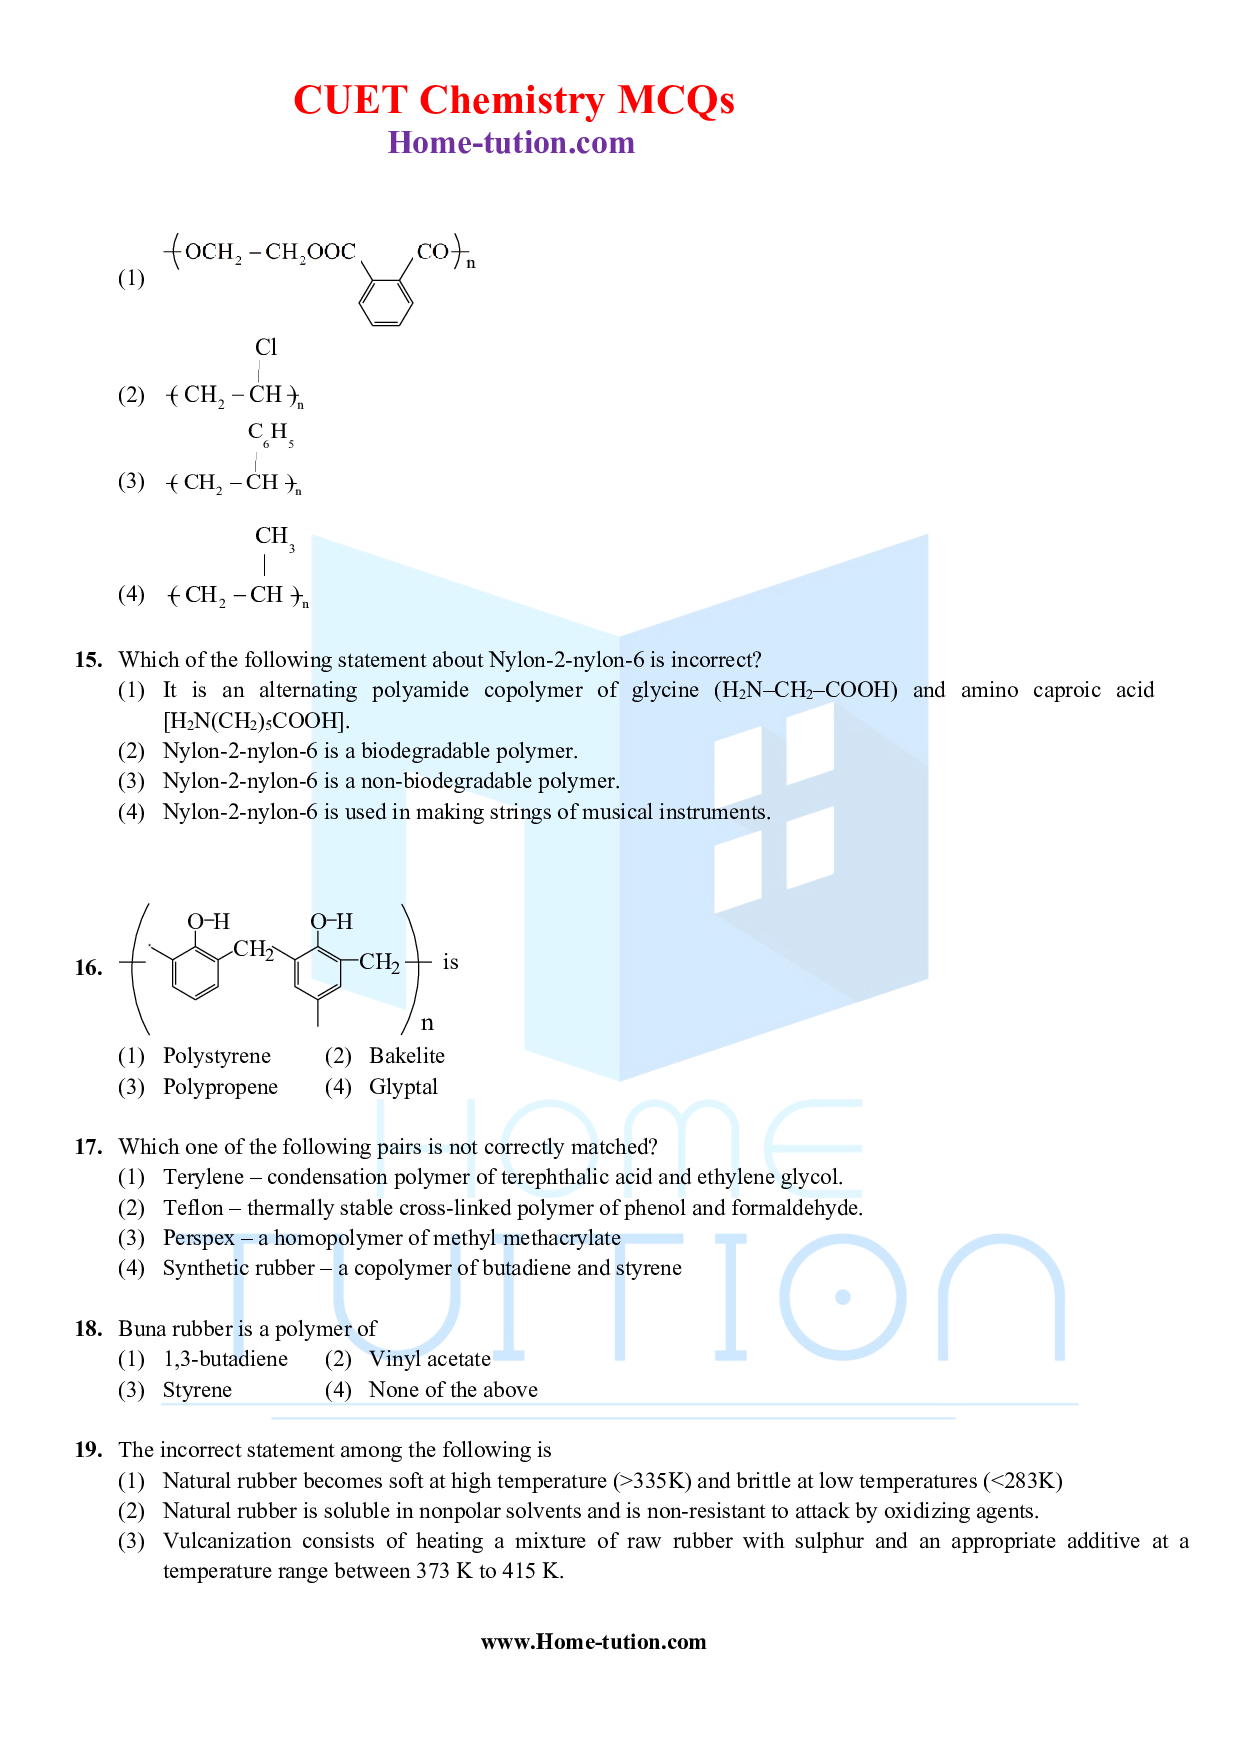 CUET MCQ Questions For Chapter 15 Polymer